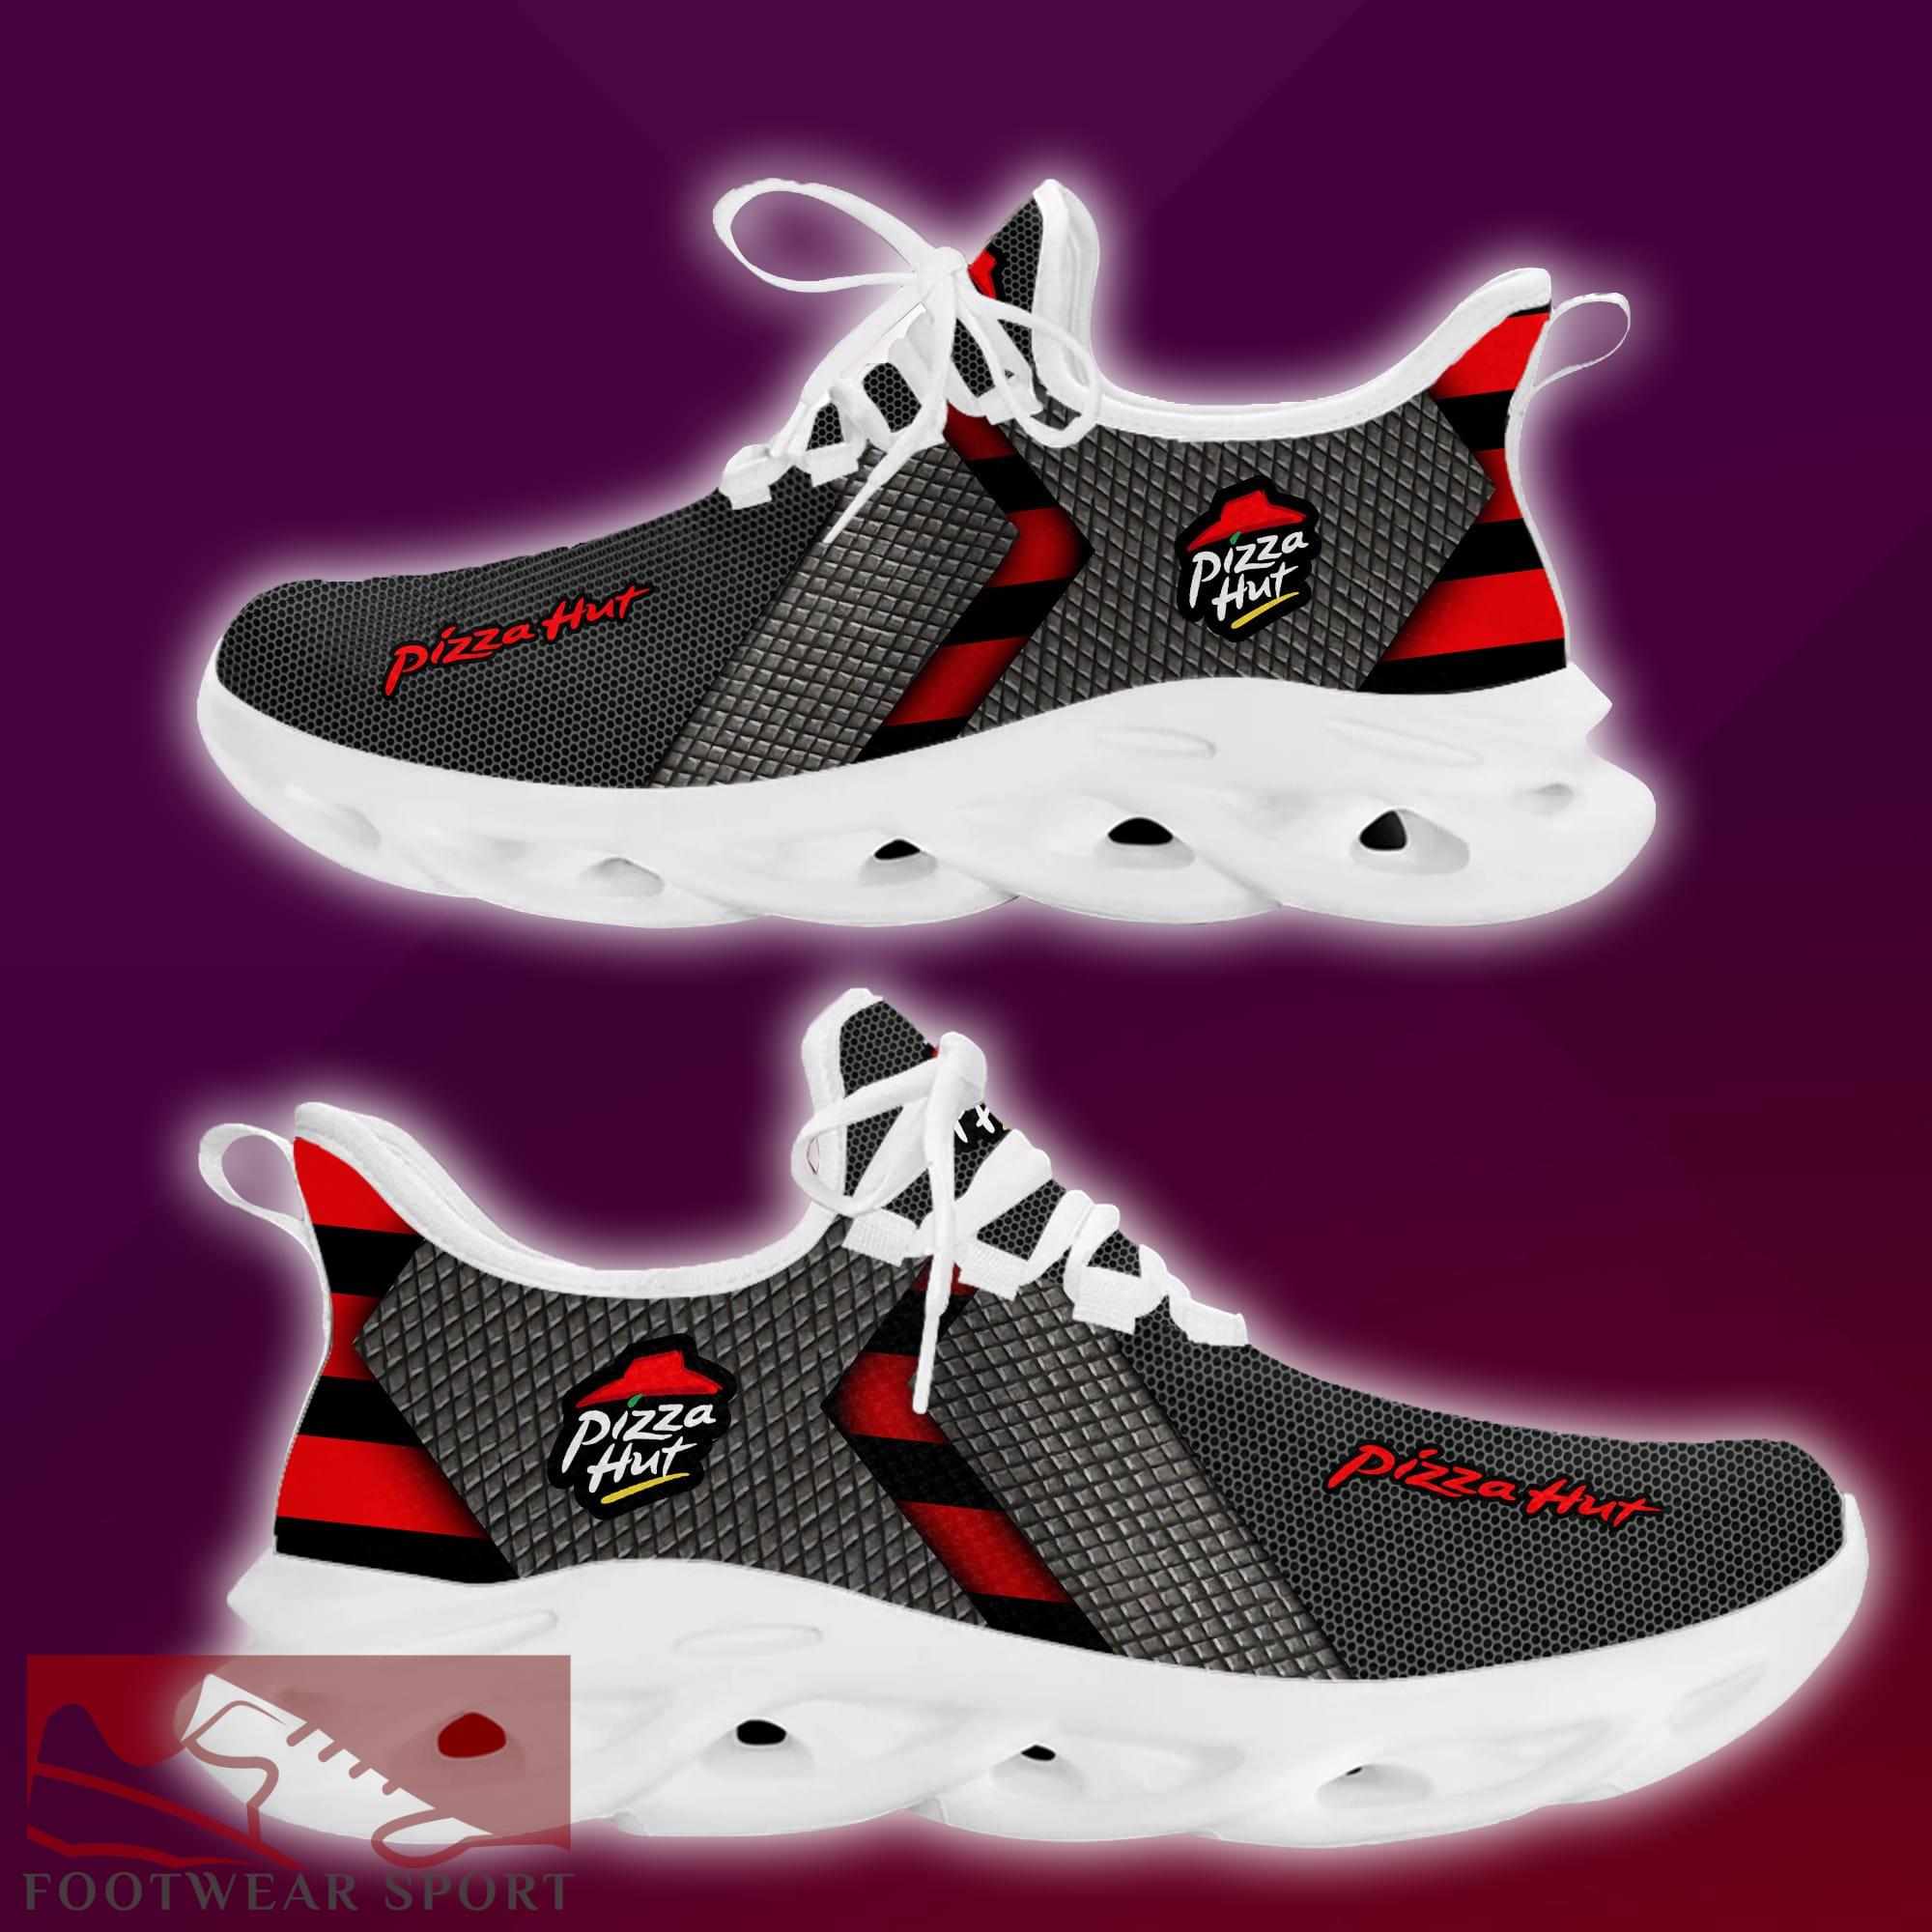 pizza hut Brand New Logo Max Soul Sneakers Athleisure Chunky Shoes Gift - pizza hut New Brand Chunky Shoes Style Max Soul Sneakers Photo 2